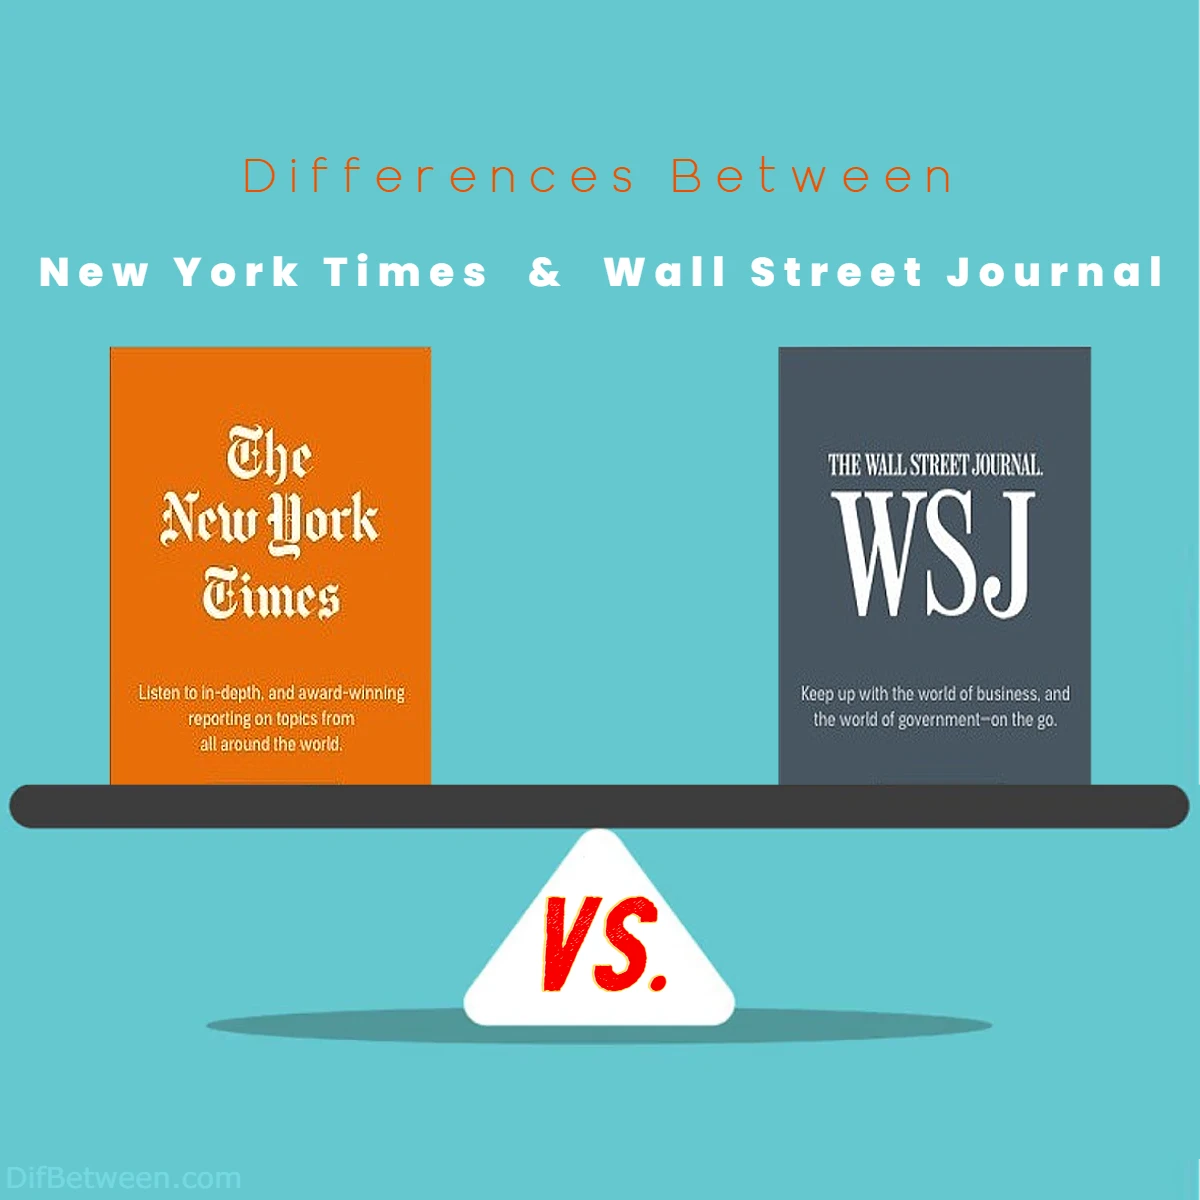 Differences Between New York Times vs Wall Street Journal